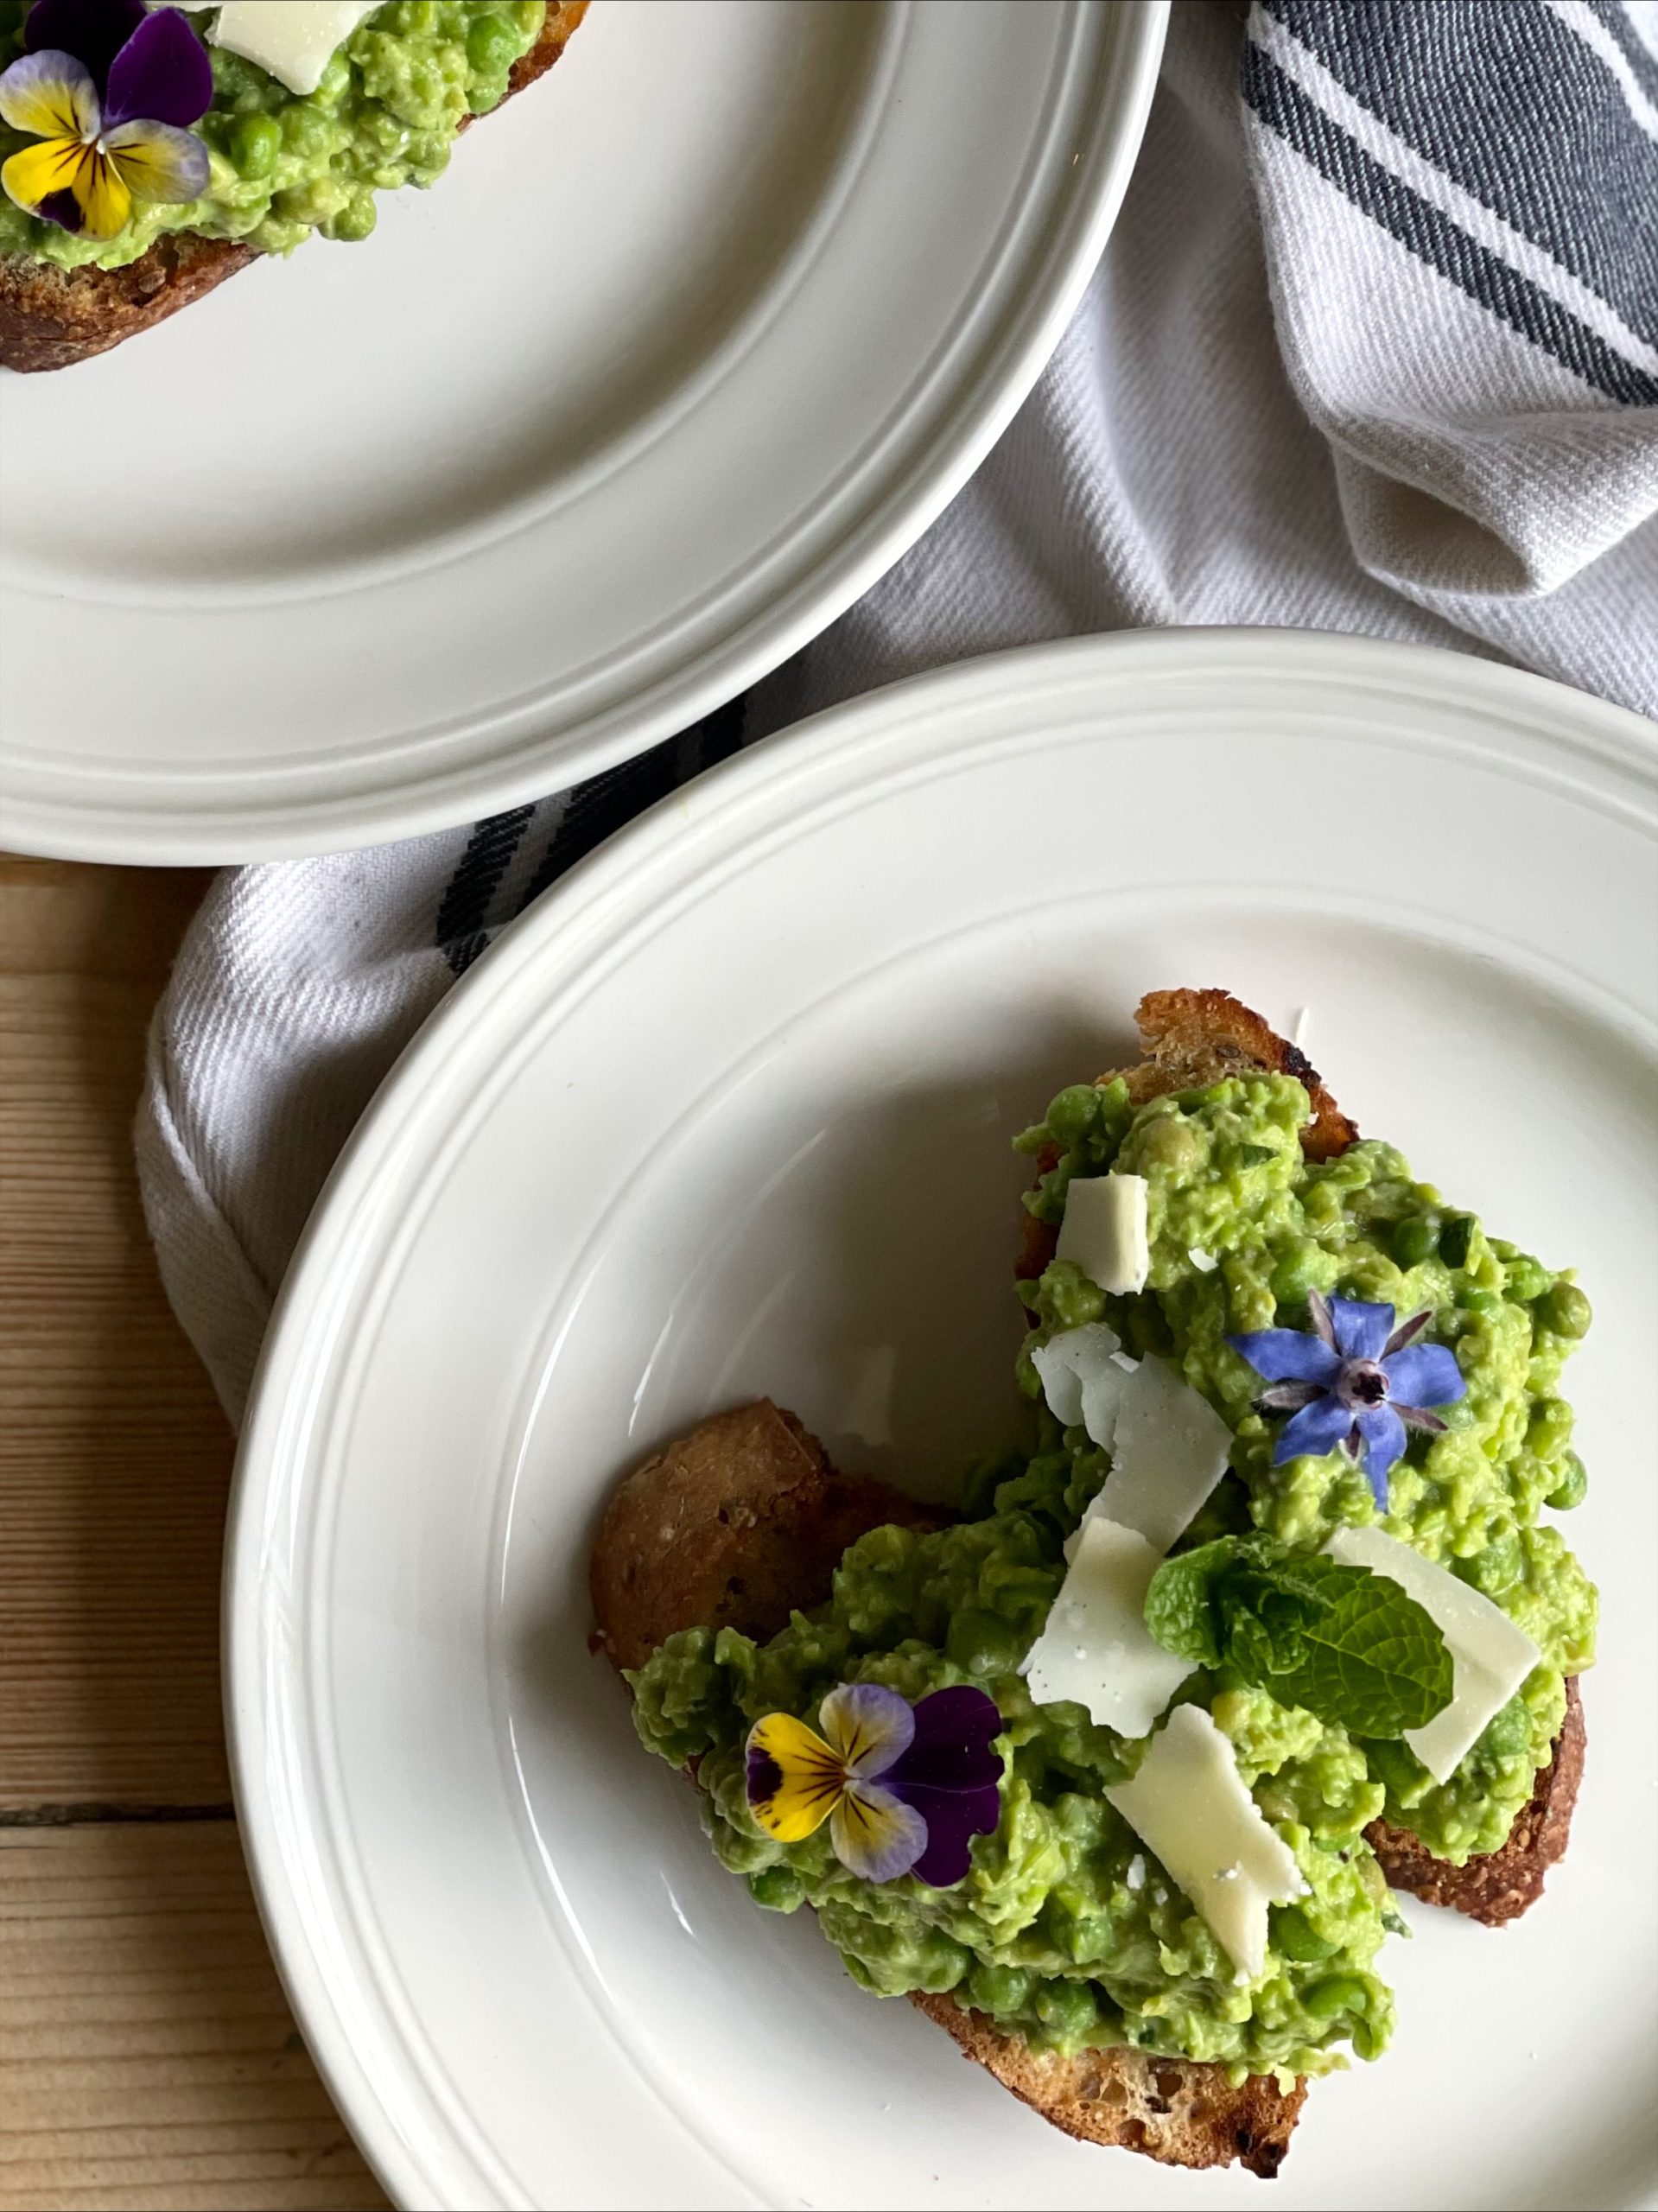 Smashed peas on garlicky toast with edible flowers